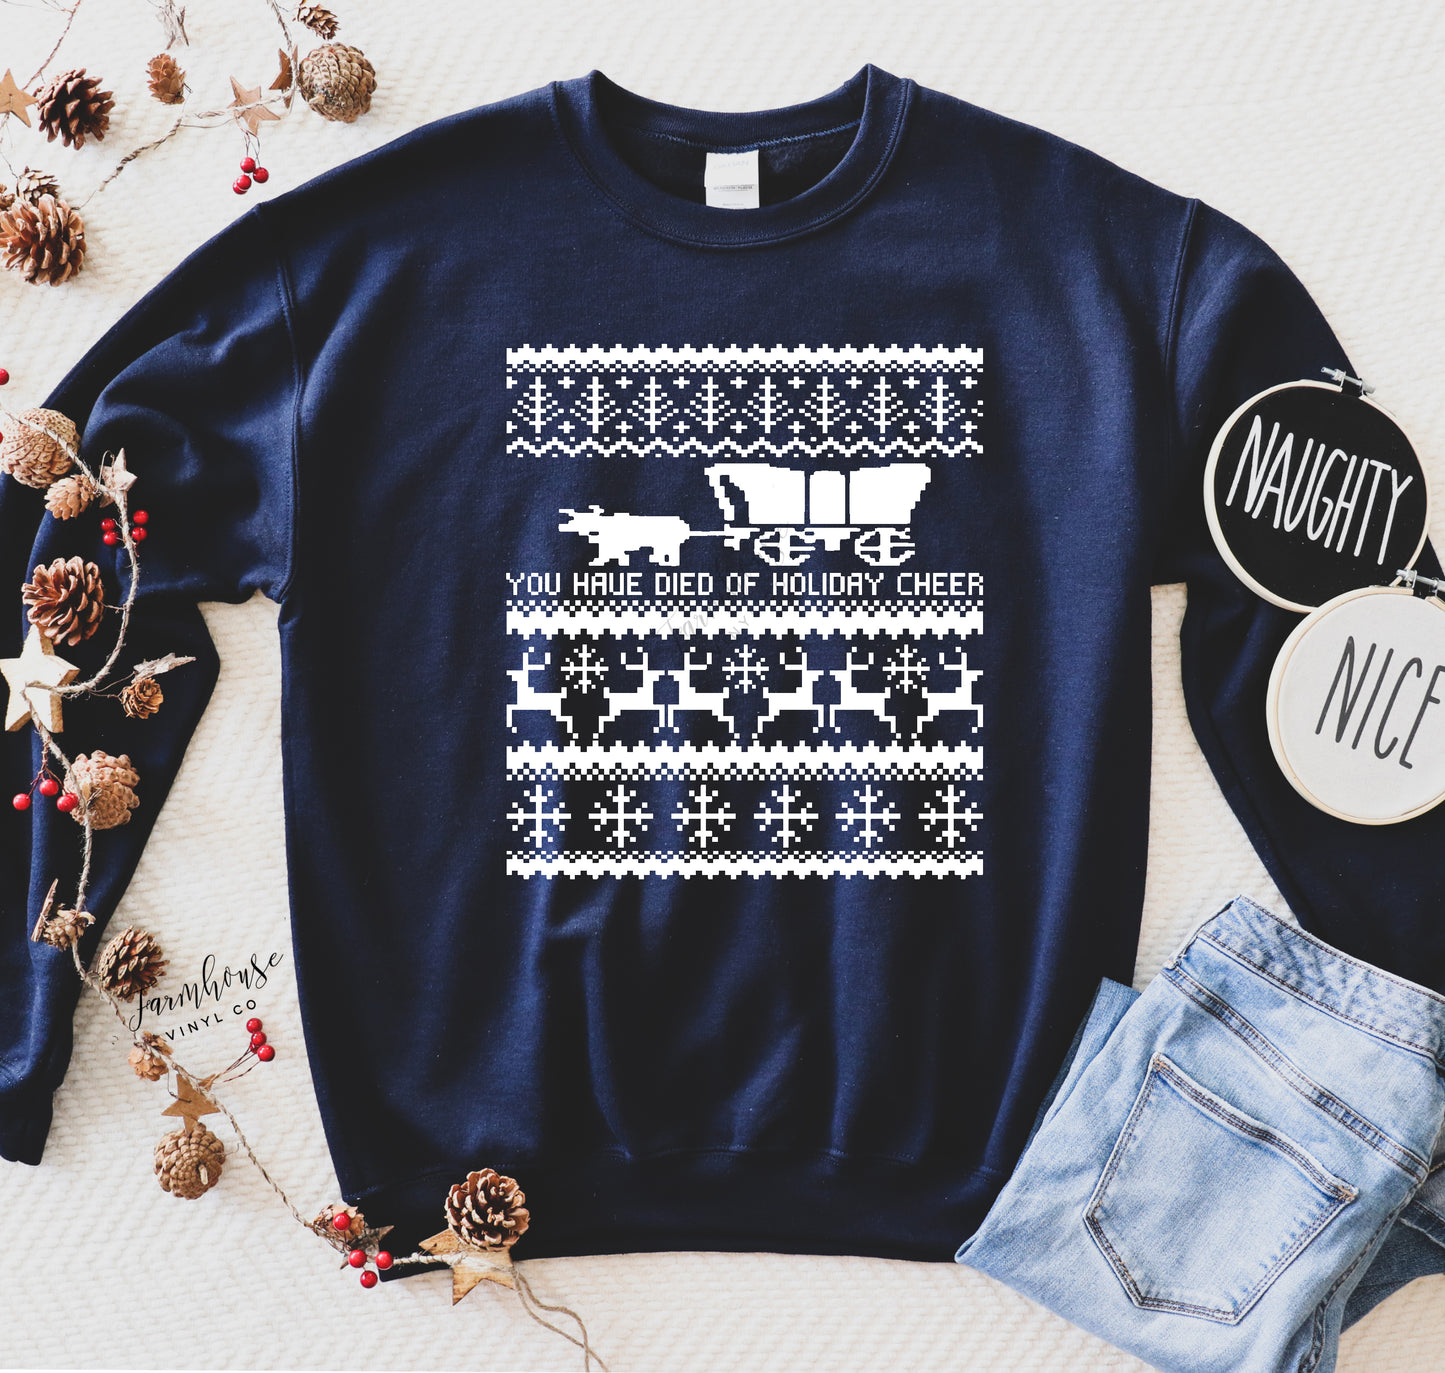 Oregon Trail You Have Died of Holiday Cheer Ugly Christmas Sweatshirt